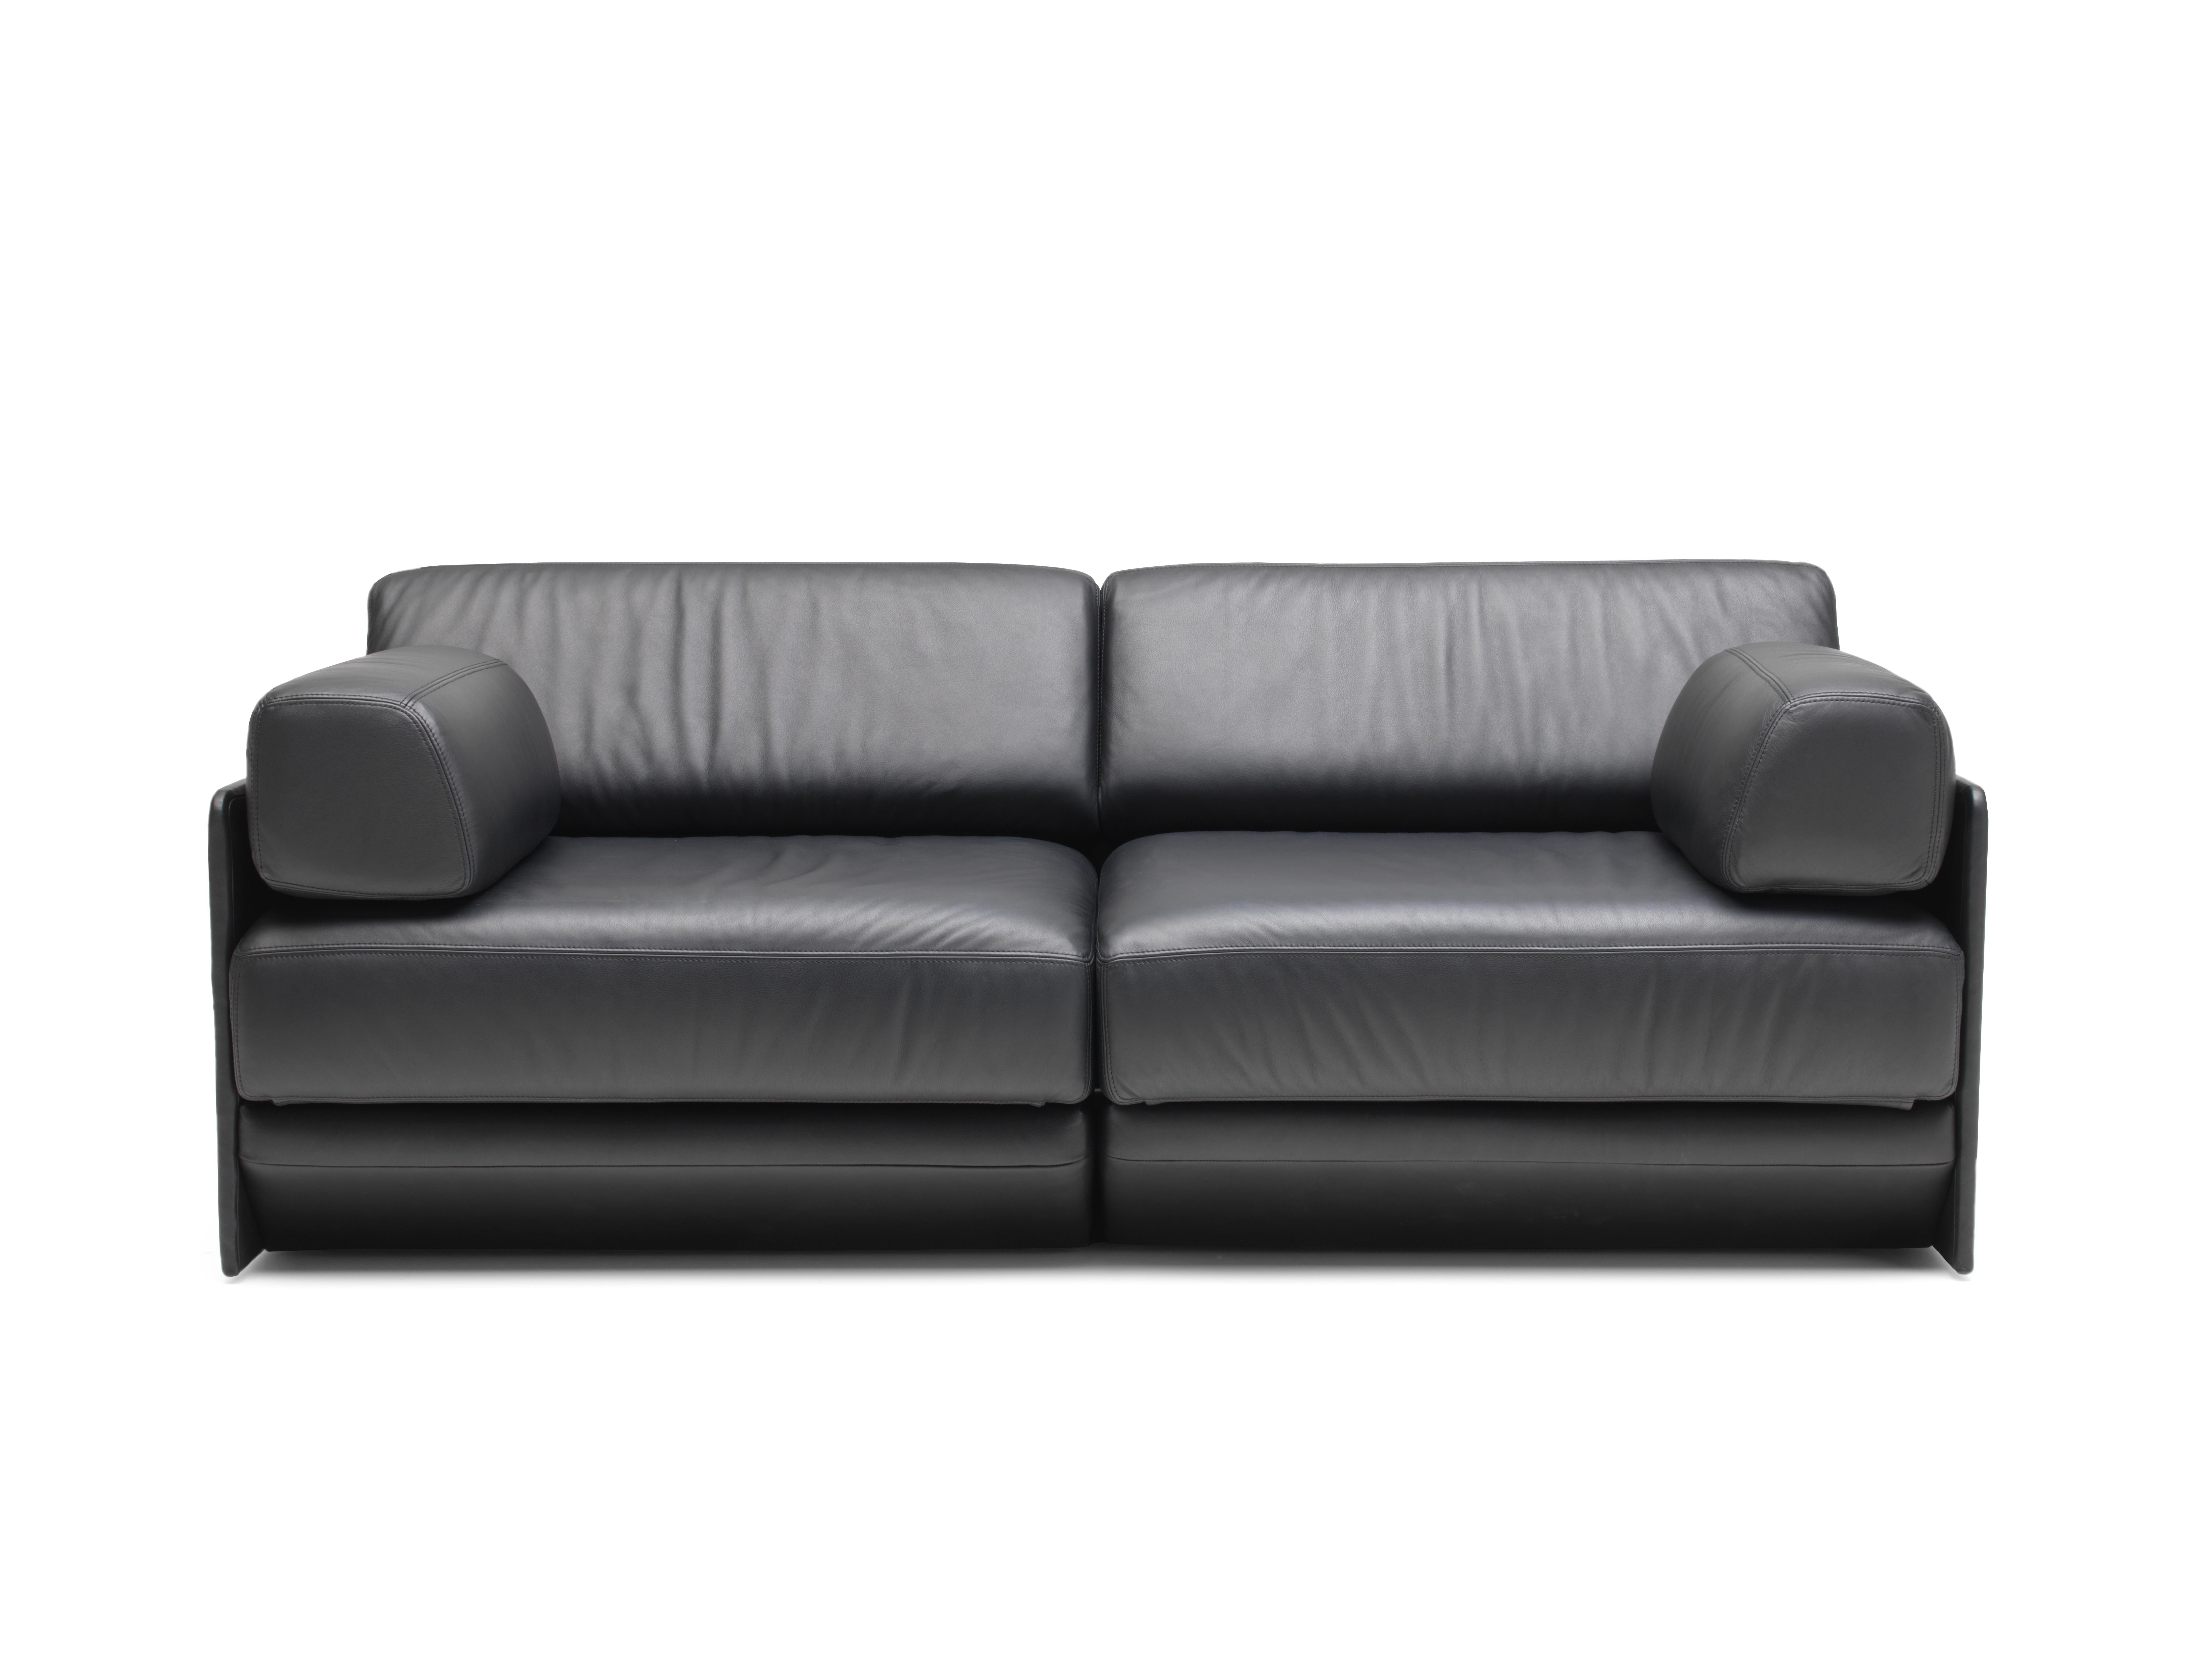 DS-76 Sofa/Bed by De Sede
Dimensions: D 66 x W 188 x H 53 cm, with bed extension W 225
Materials: Belted spring suspension on seat frame made of solid beech, leather.

Prices may change according to the chosen materials and size. 

A special